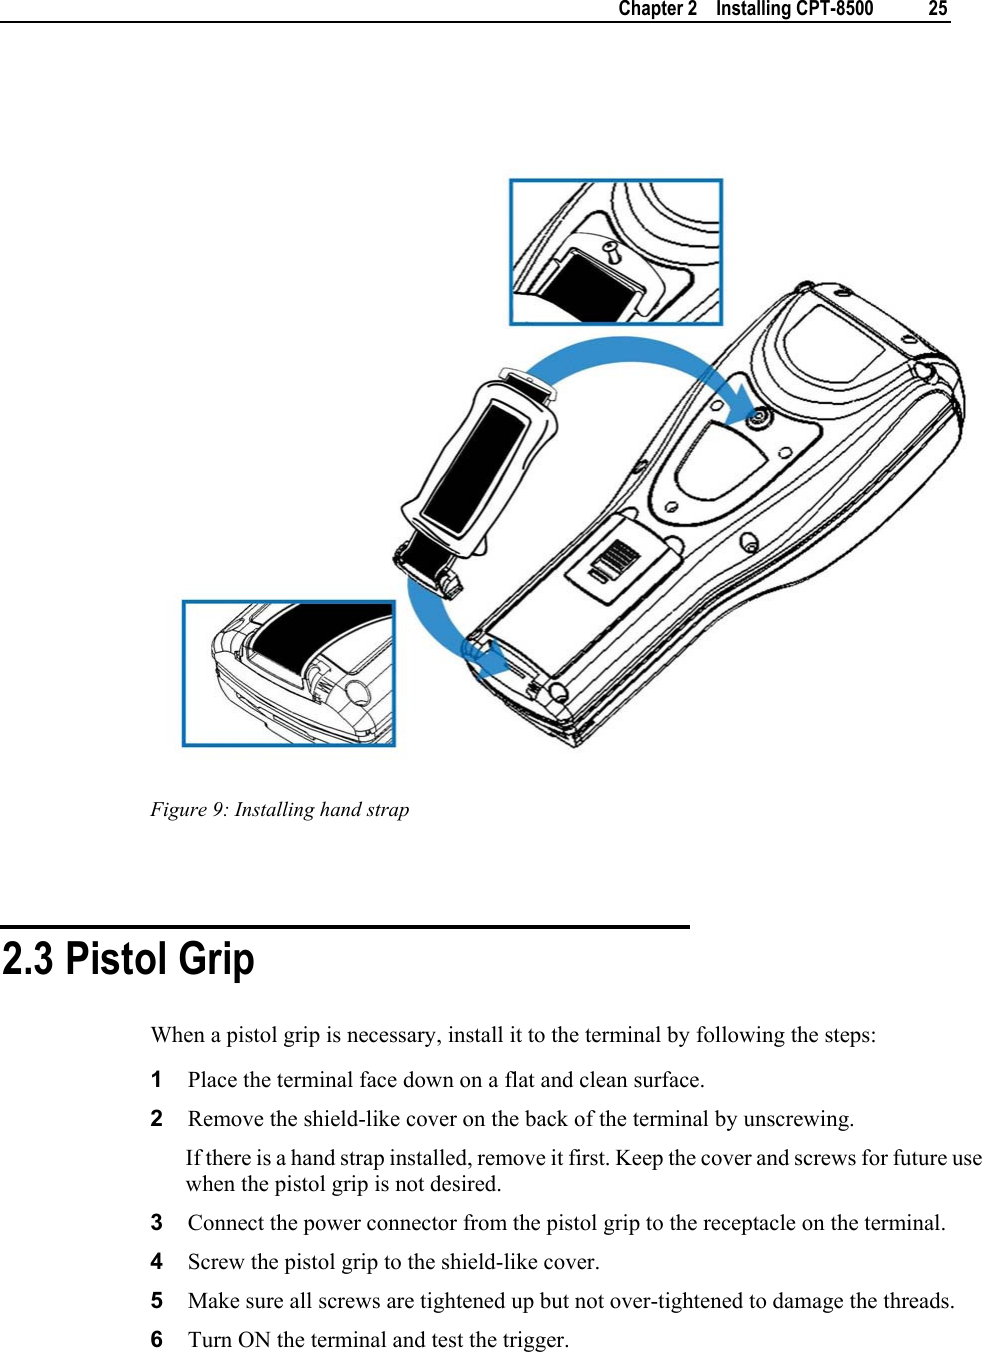    Chapter 2    Installing CPT-8500  25     Figure 9: Installing hand strap   2.3 Pistol Grip When a pistol grip is necessary, install it to the terminal by following the steps: 1  Place the terminal face down on a flat and clean surface.  2  Remove the shield-like cover on the back of the terminal by unscrewing.  If there is a hand strap installed, remove it first. Keep the cover and screws for future use when the pistol grip is not desired. 3  Connect the power connector from the pistol grip to the receptacle on the terminal. 4  Screw the pistol grip to the shield-like cover. 5  Make sure all screws are tightened up but not over-tightened to damage the threads. 6  Turn ON the terminal and test the trigger. 